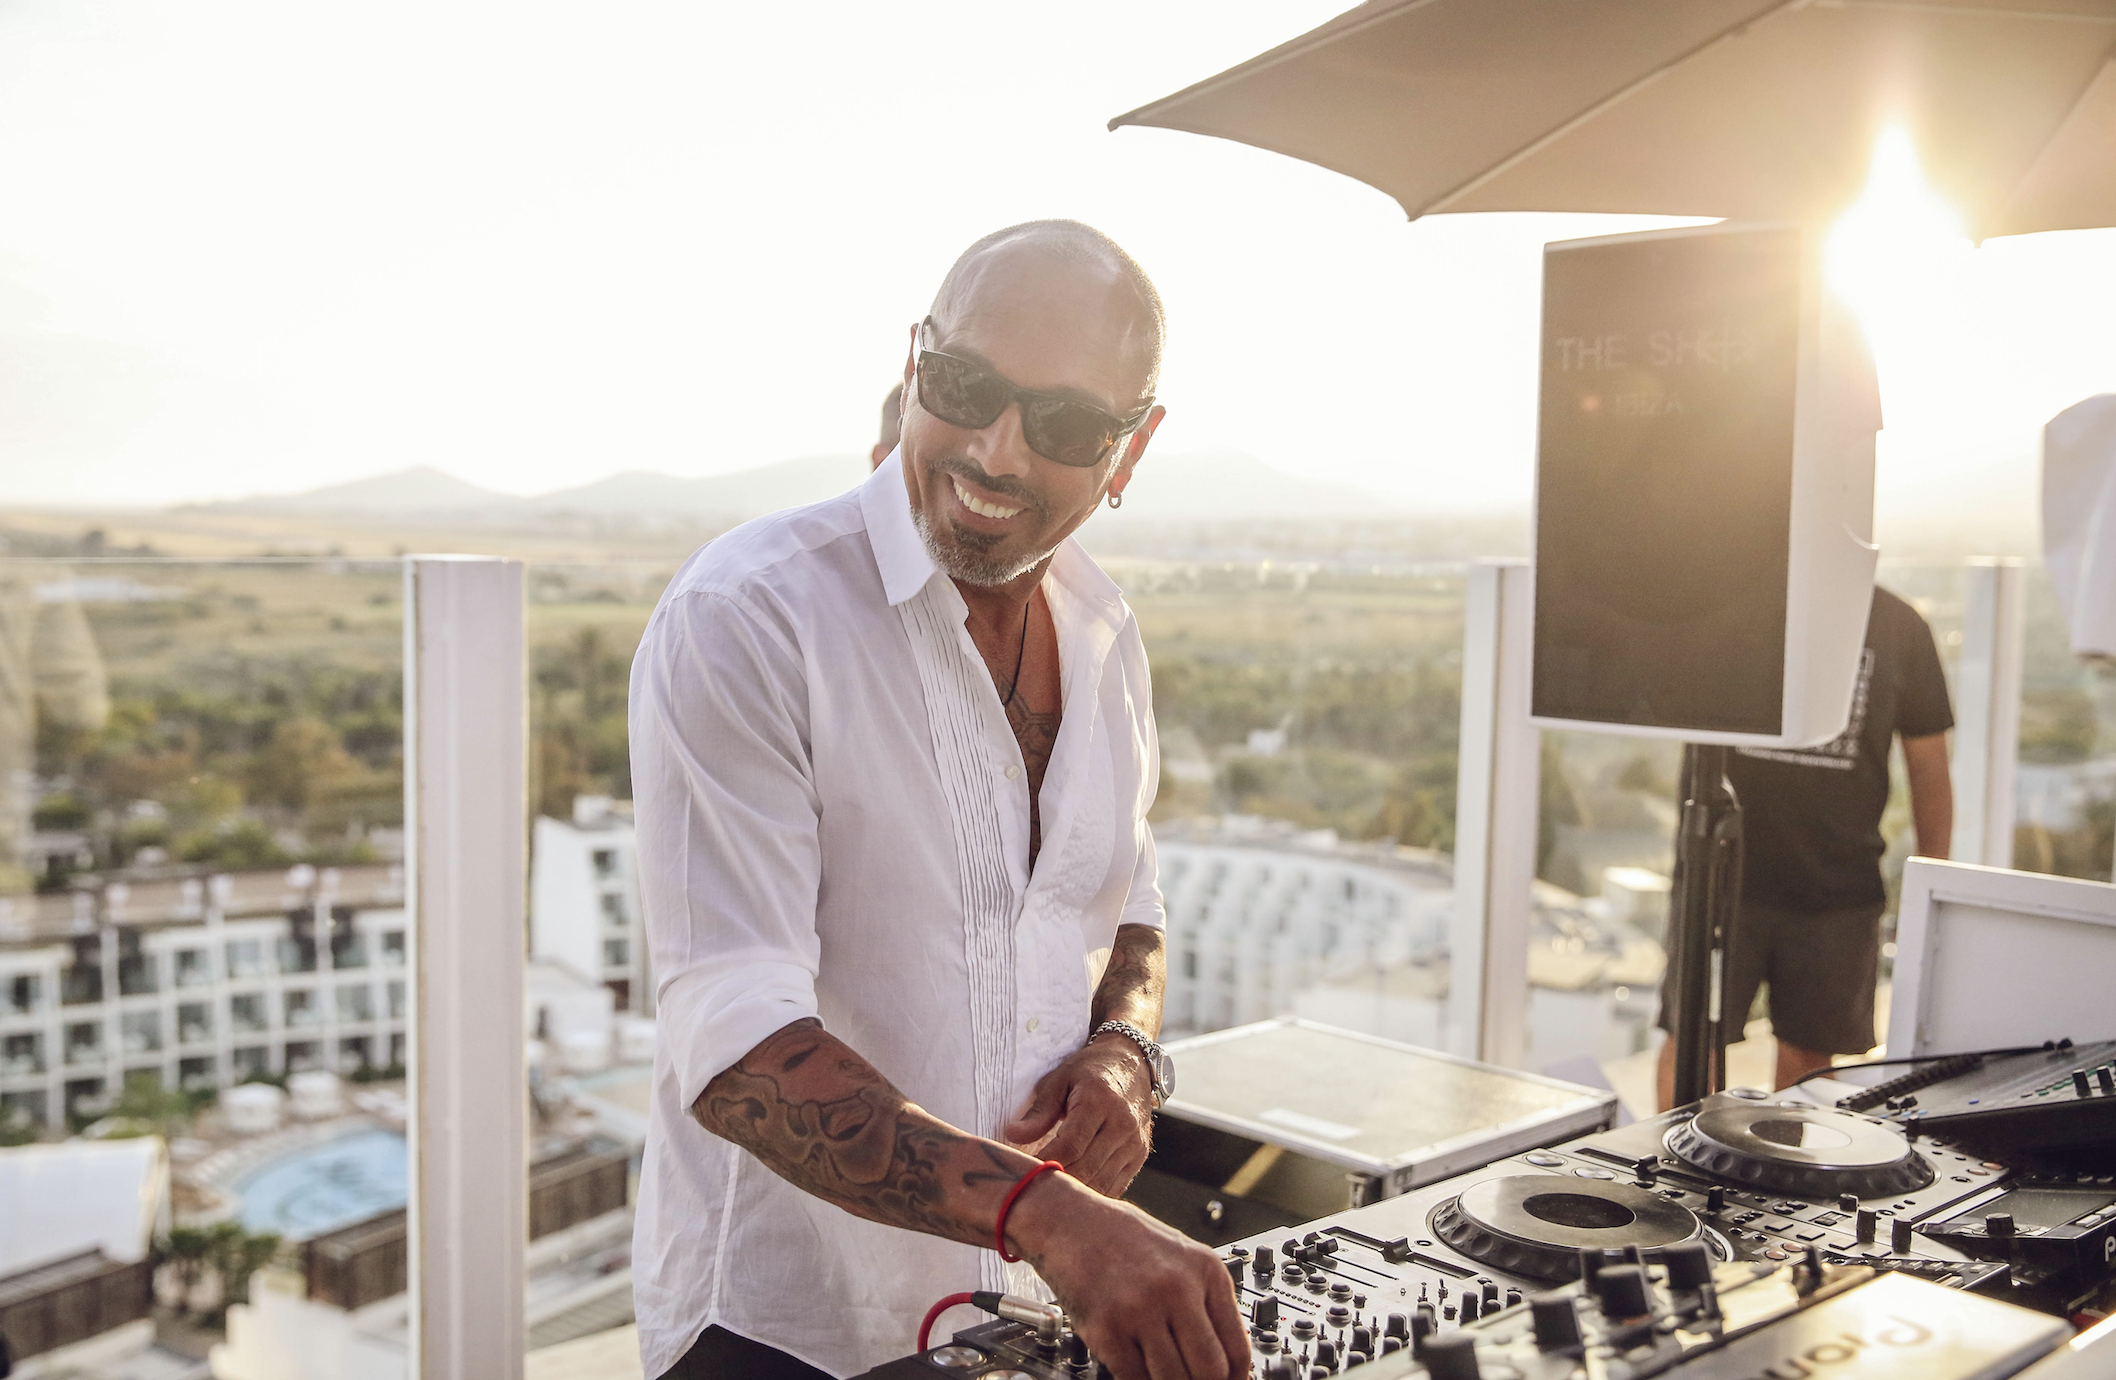 David Morales on Ibiza, embracing change and New York club culture